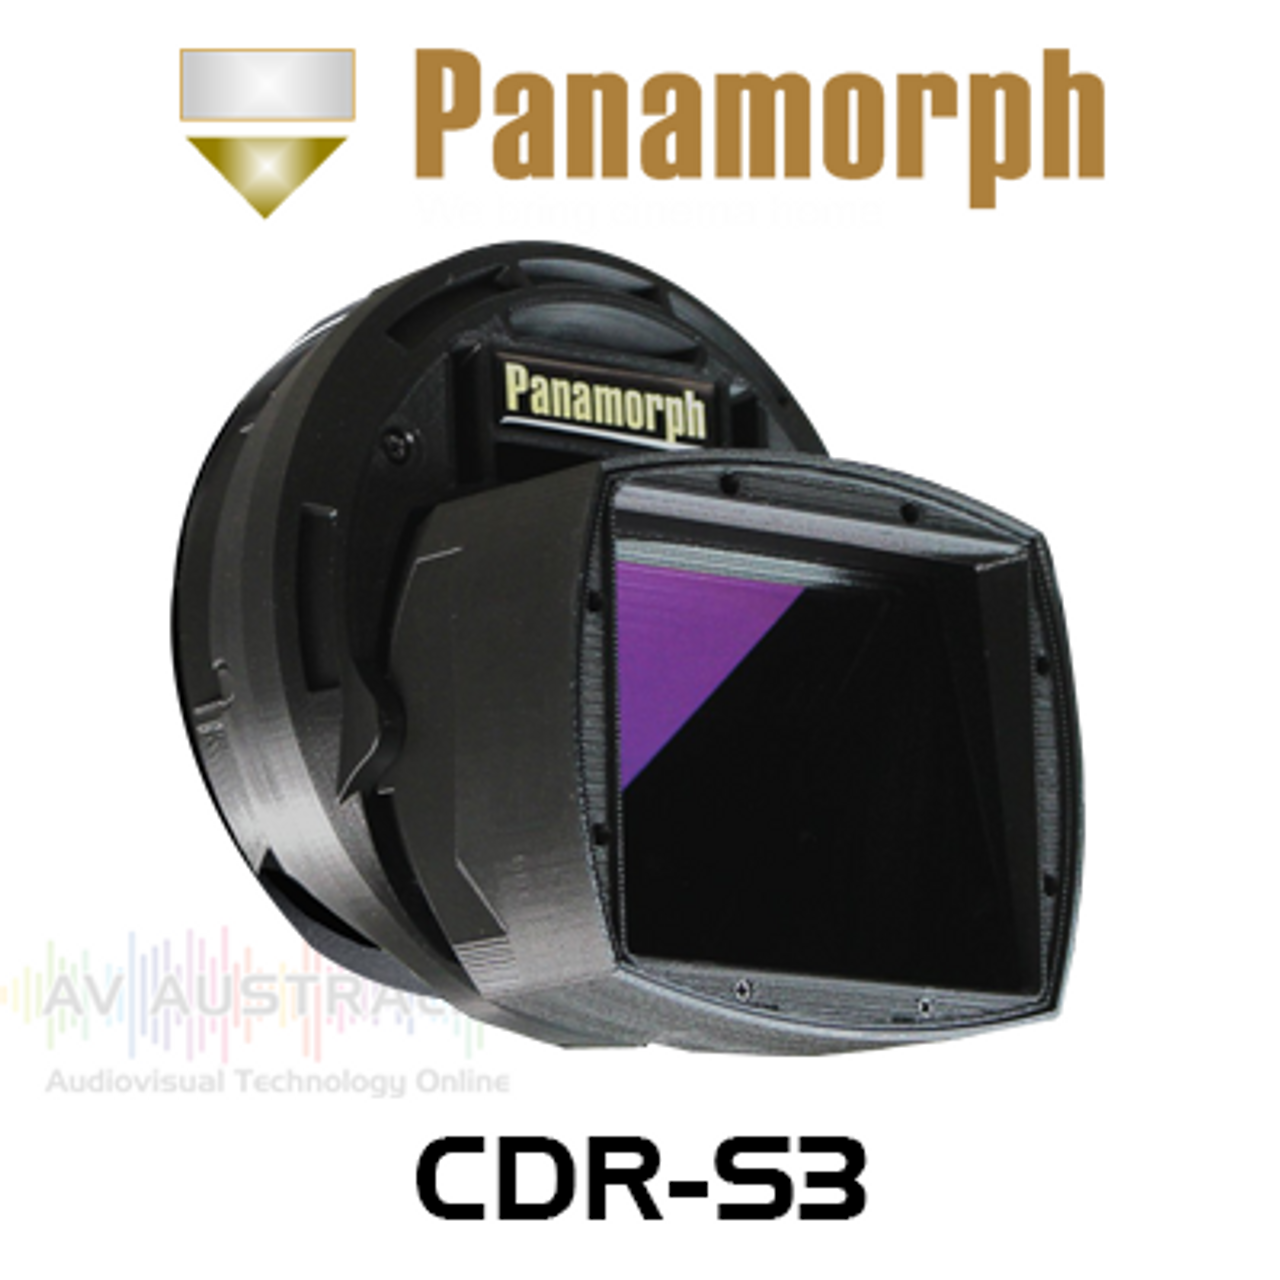 Panamorph CDR-S3 Anamorphic Lens System For Sony VPL-XW5000ES